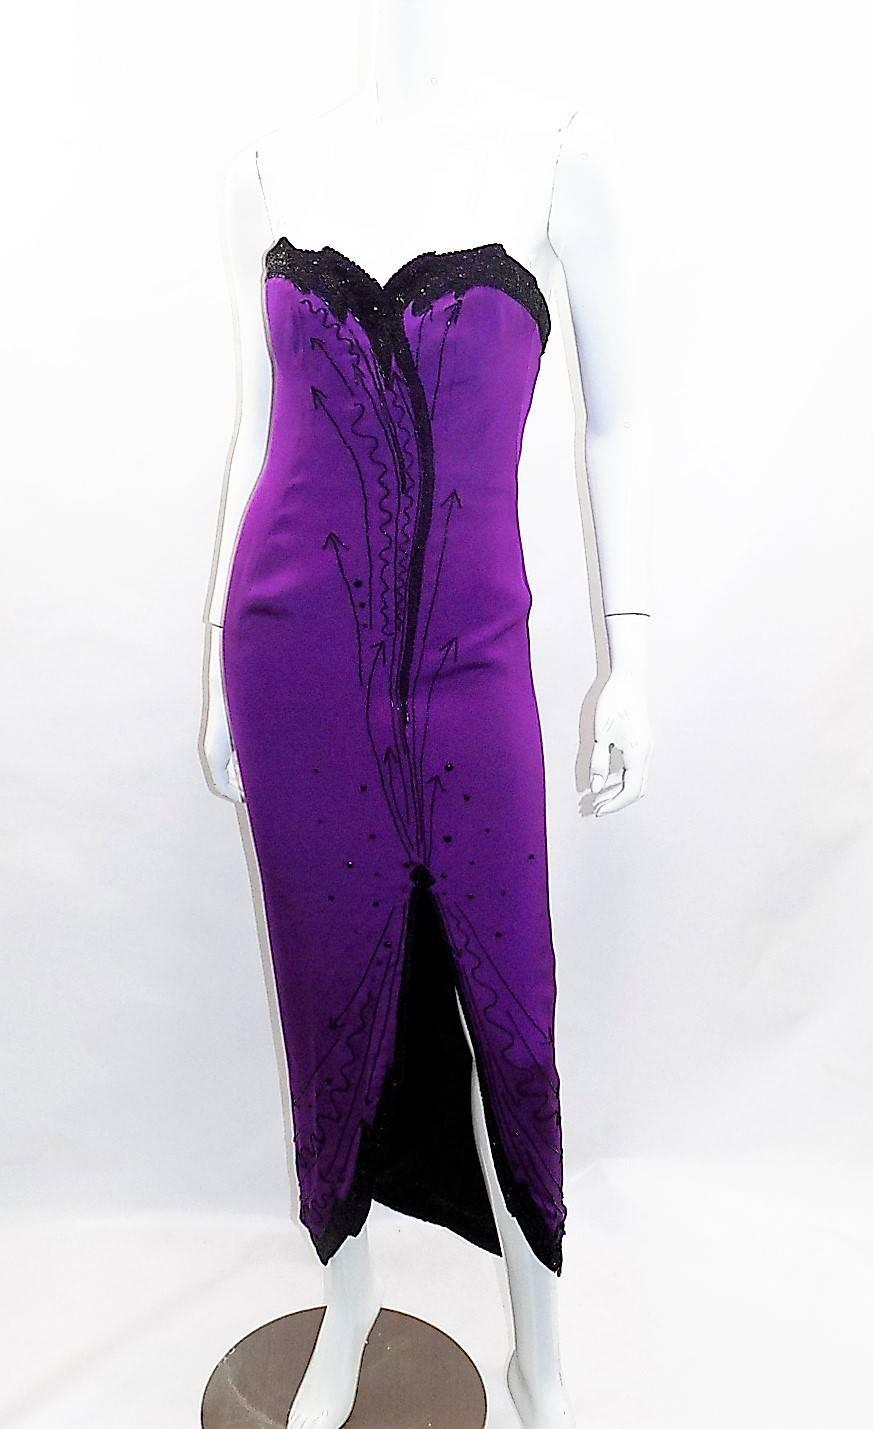 Circa 1980 In Pristine condition Never worn Fabulous Fabrice Gown.  Fully Boned Corset Strapless  Dress. Dark purple color with black  beading. Every bead is intact!! Look Glamorous!! Size Small
Bust 32"-34" Waist 26" Length taken at